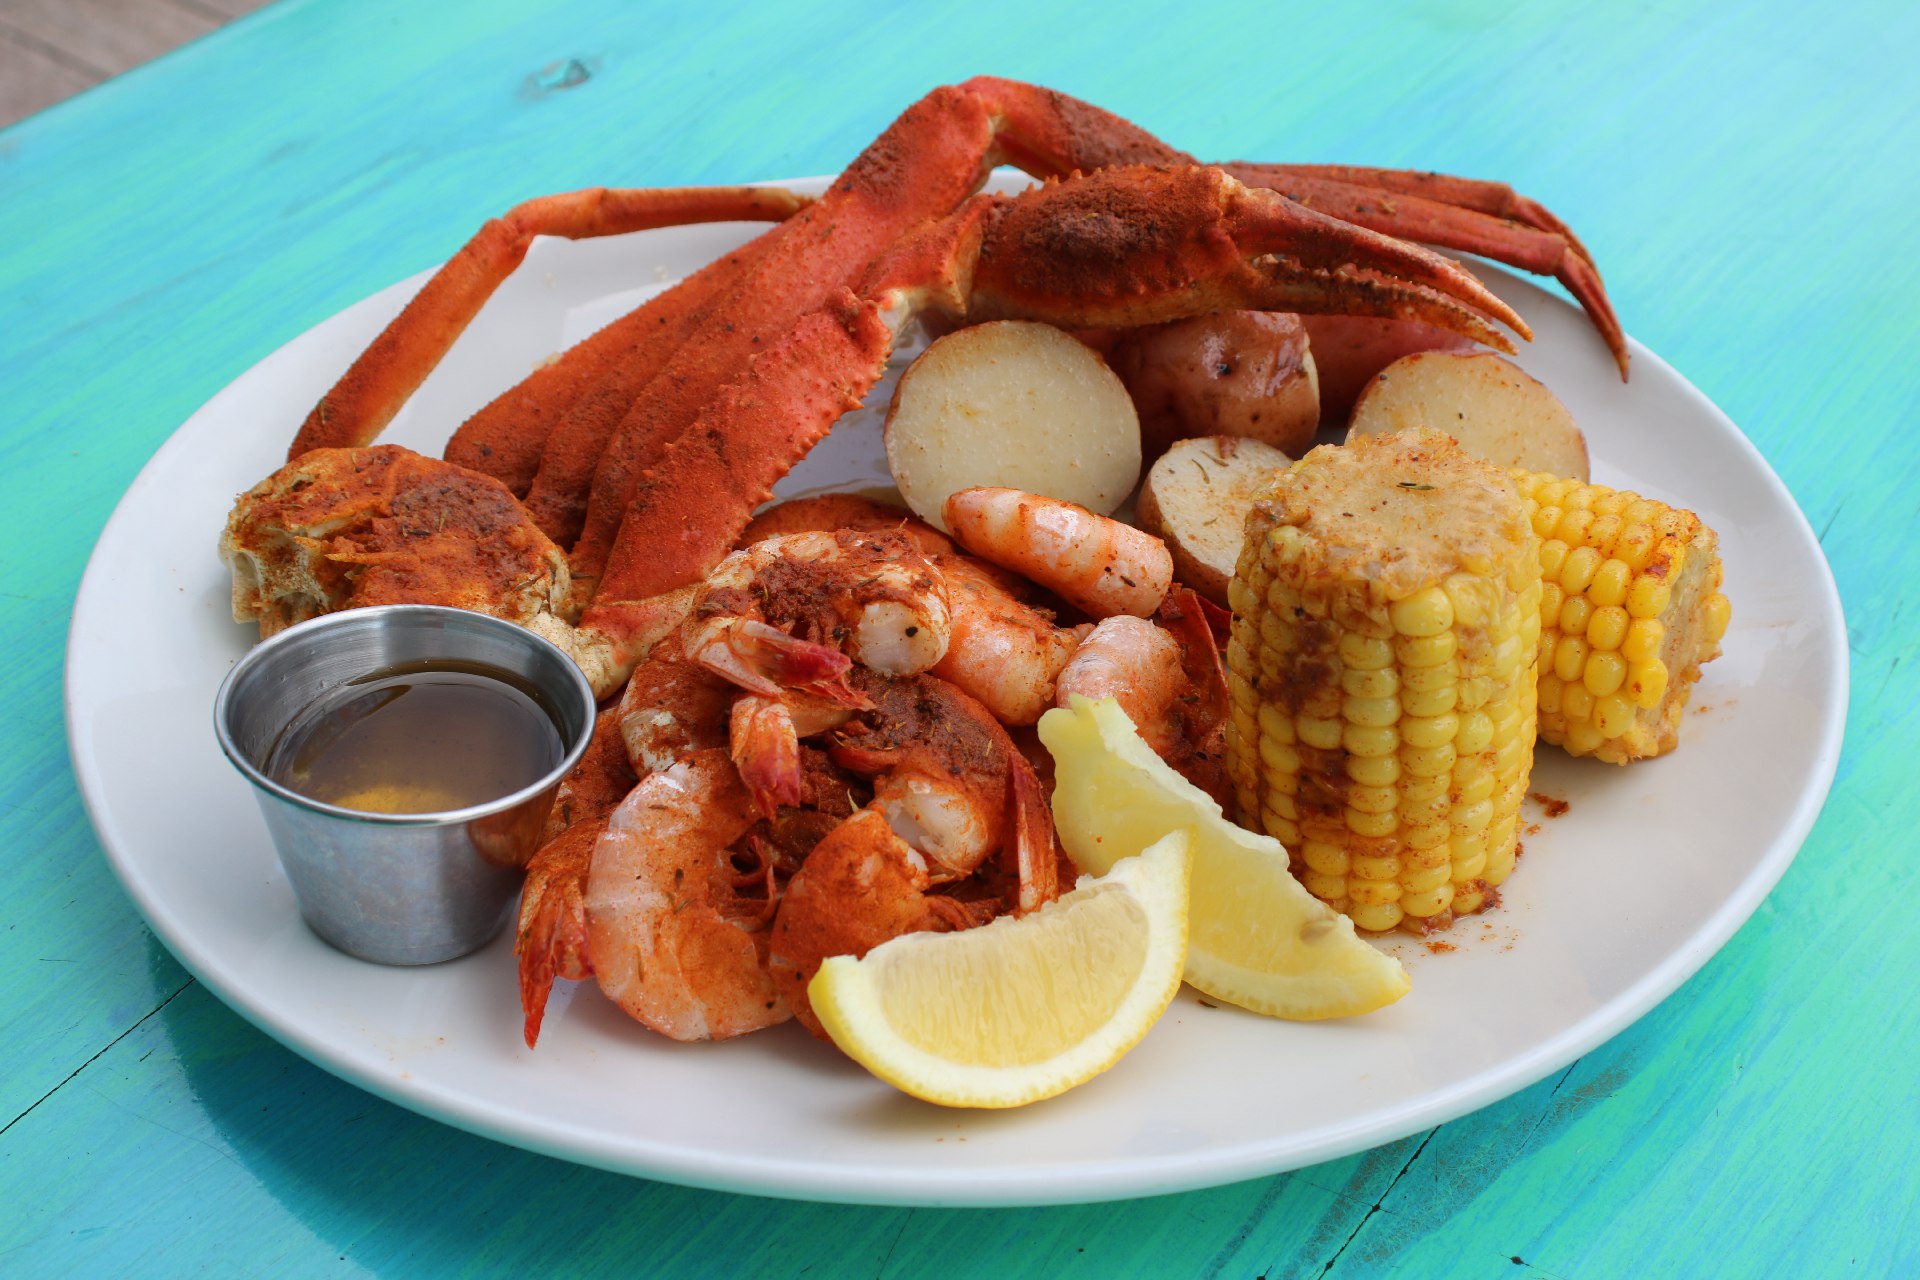 steamed seafood platter with corn